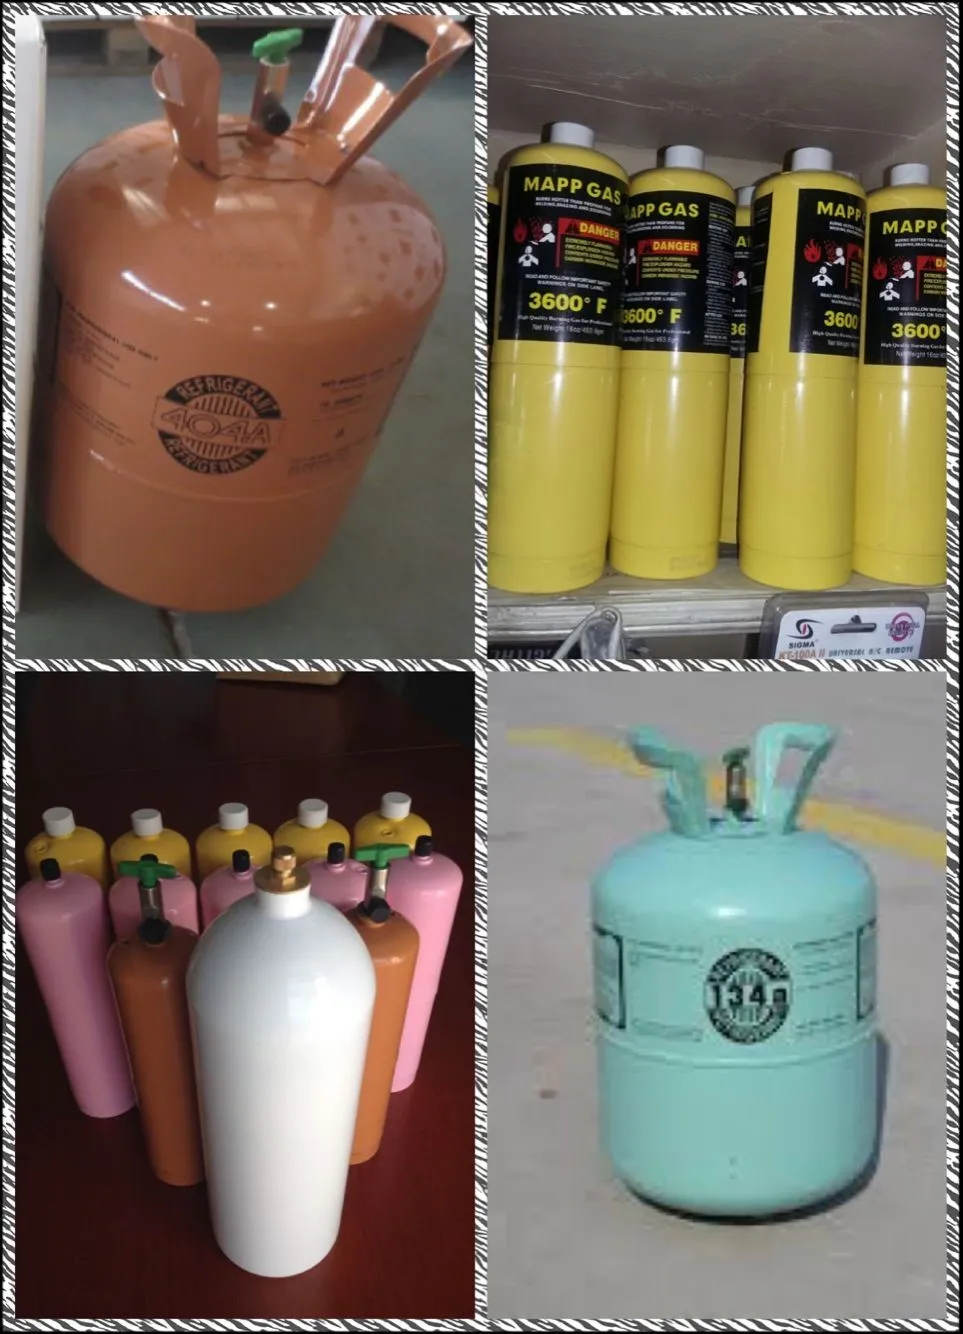 Mixture Of Hydrocarbons Mapp Gas for sale r134a R404A 507 407